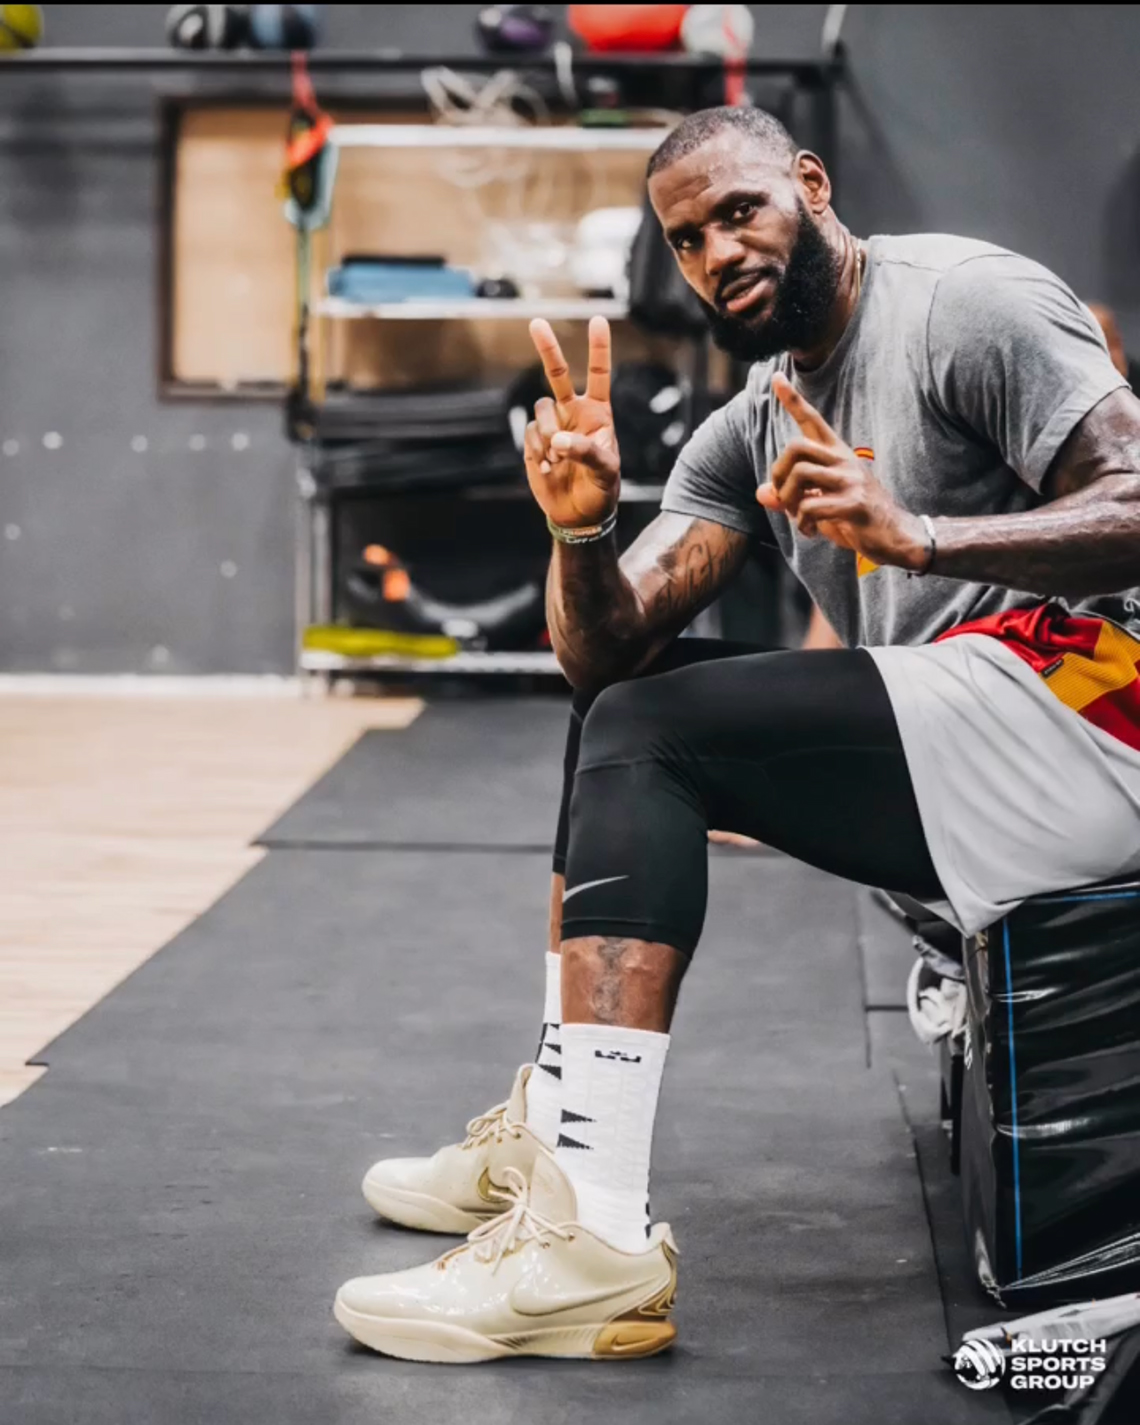 Nike releases new LeBron James 'I PROMISE' shoes today | wkyc.com